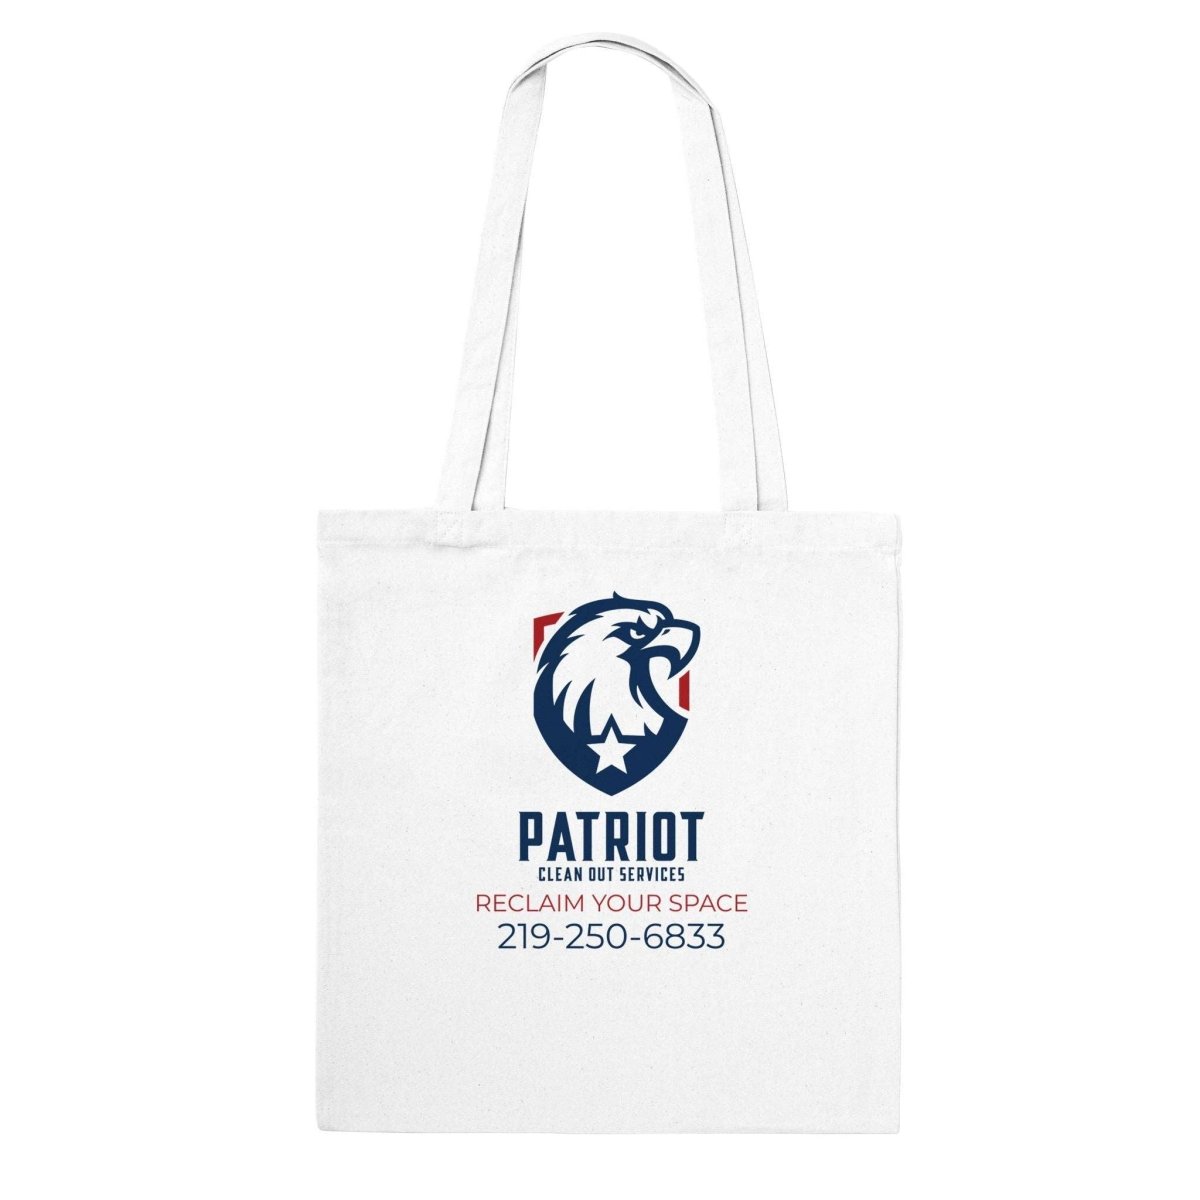 Patriotic Tote Bag with Patriot Clean Out Logo and long handles - Print Material - Navy